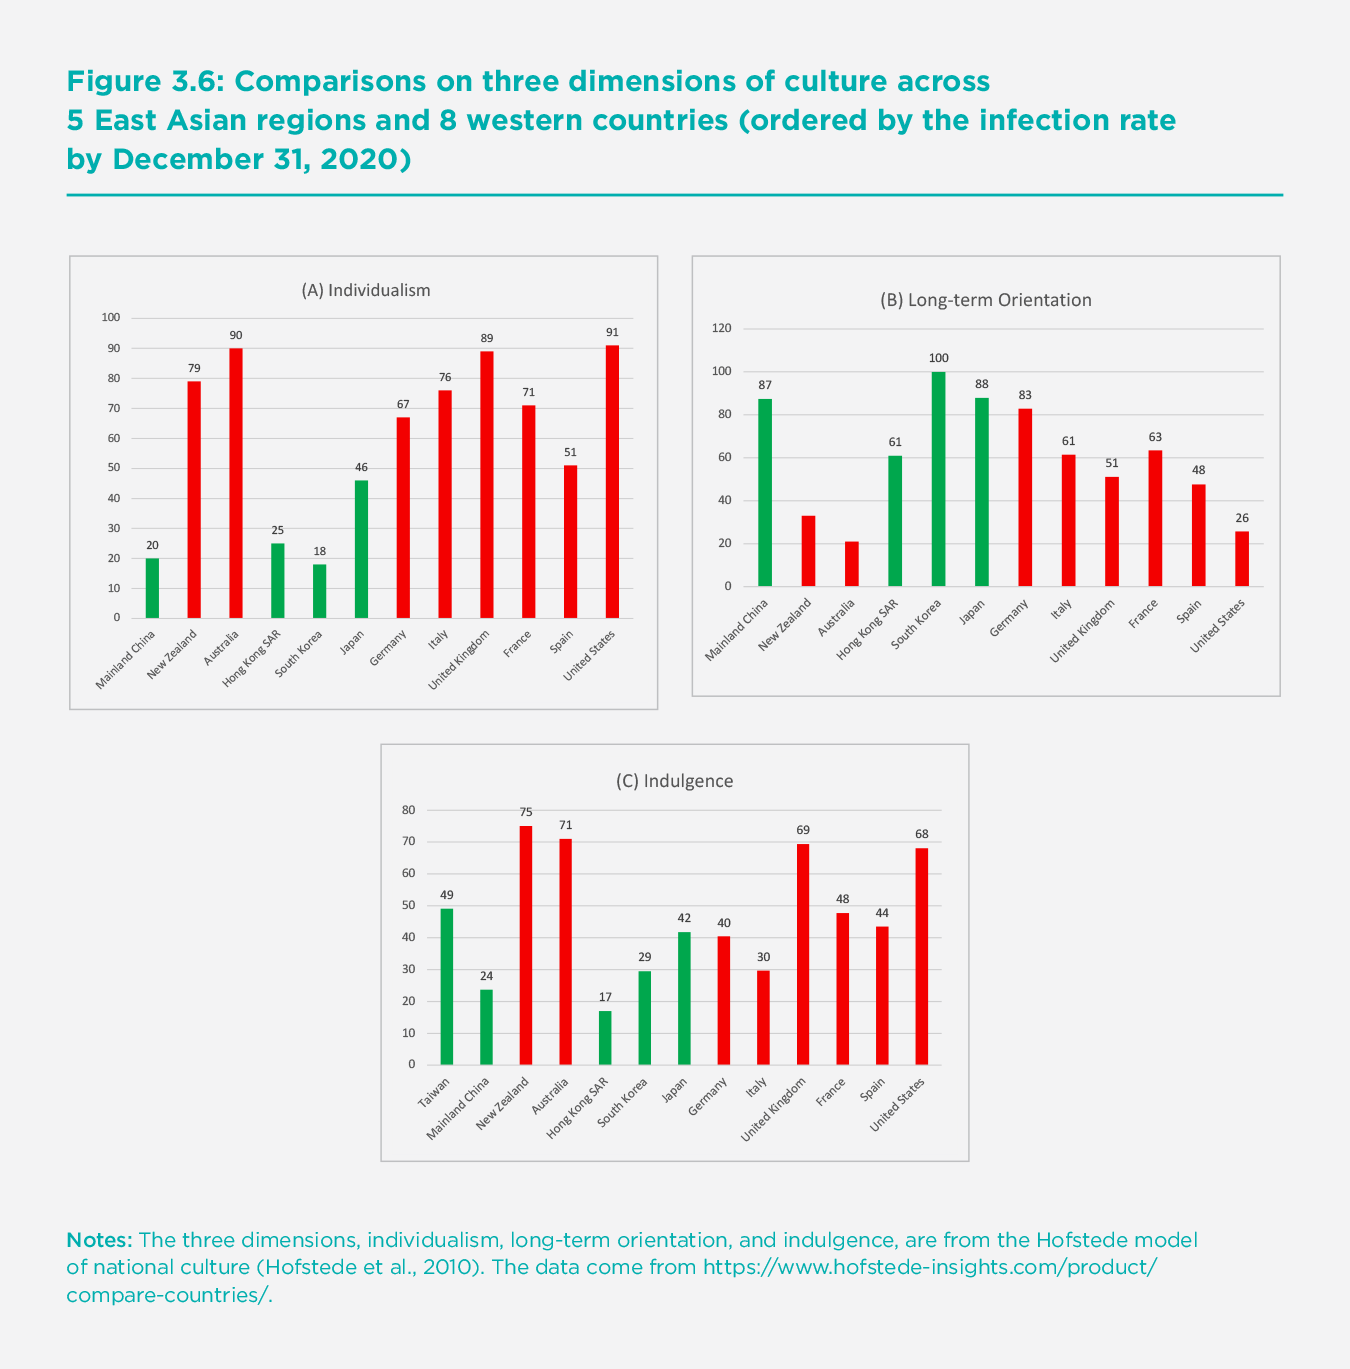  Figure 3.6: Comparisons on three dimensions of culture across 5 East Asian regions and 8 western countries (ordered by the infection rate by December 31, 2020)